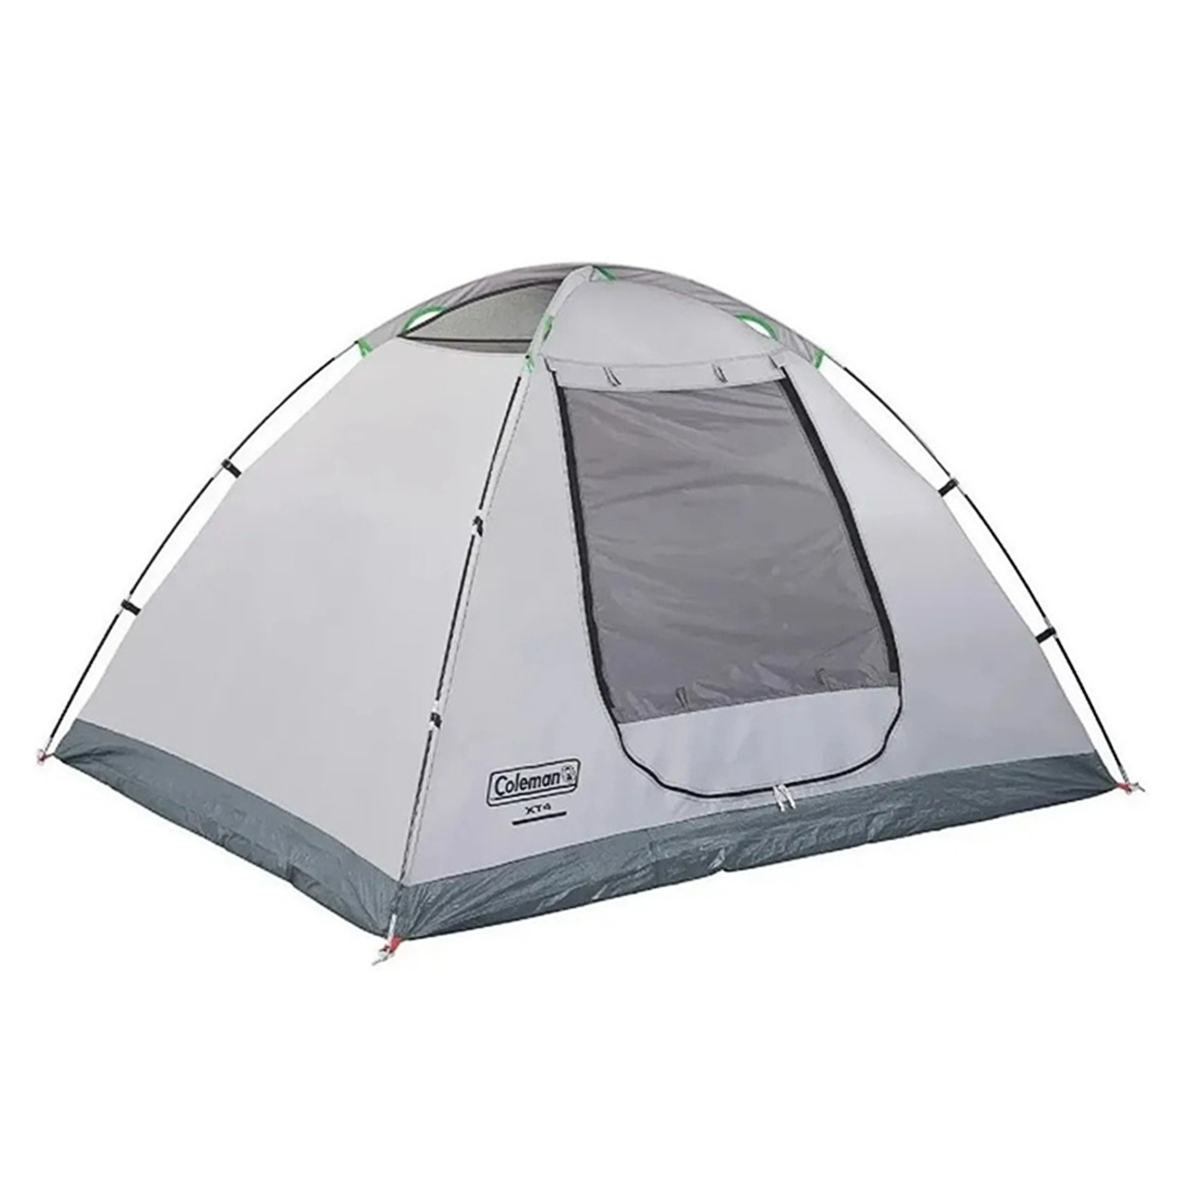 Carpa Coleman Xt 4 personas,  image number null